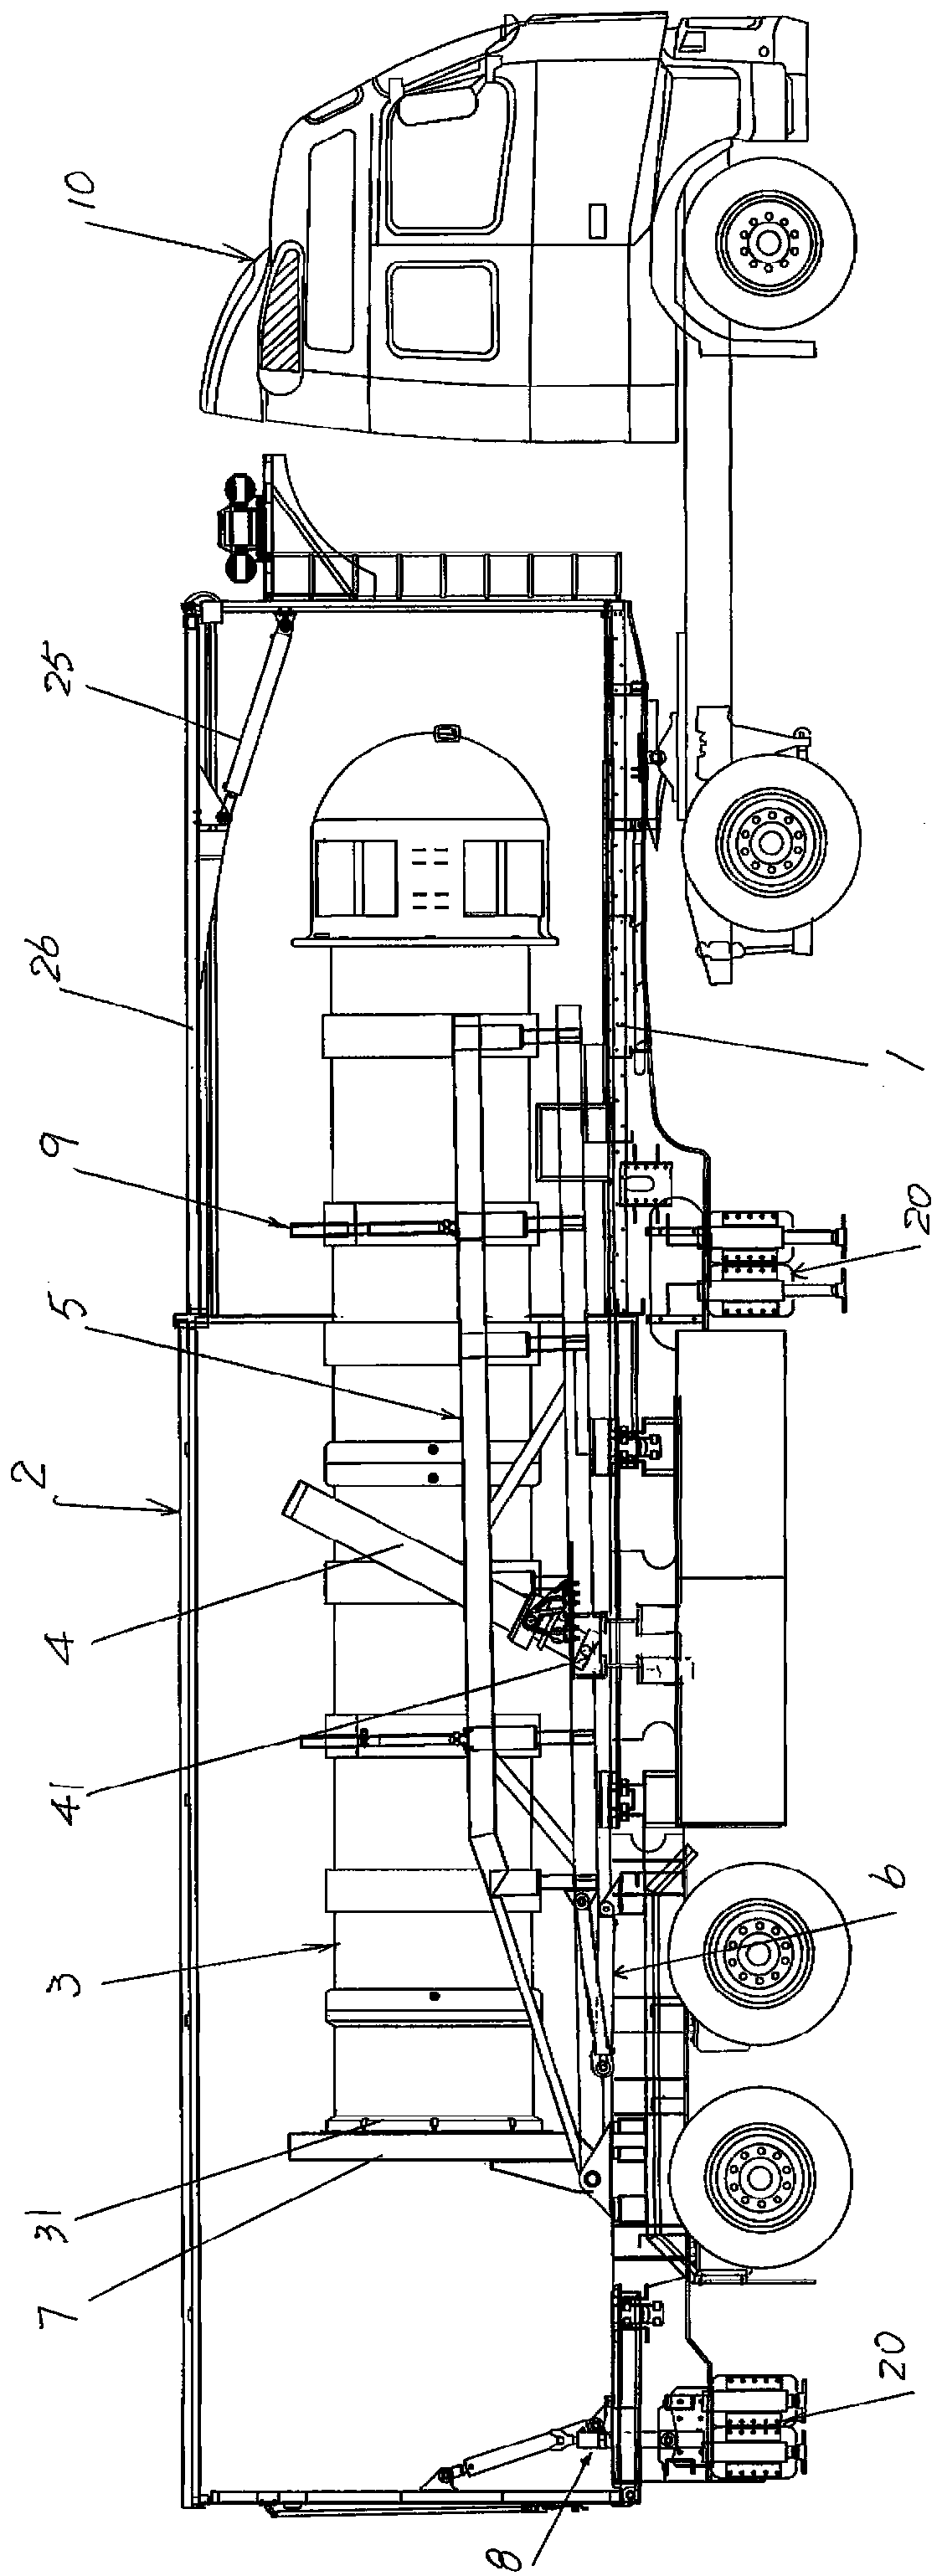 Vehicle-mounted equipment lift separating device